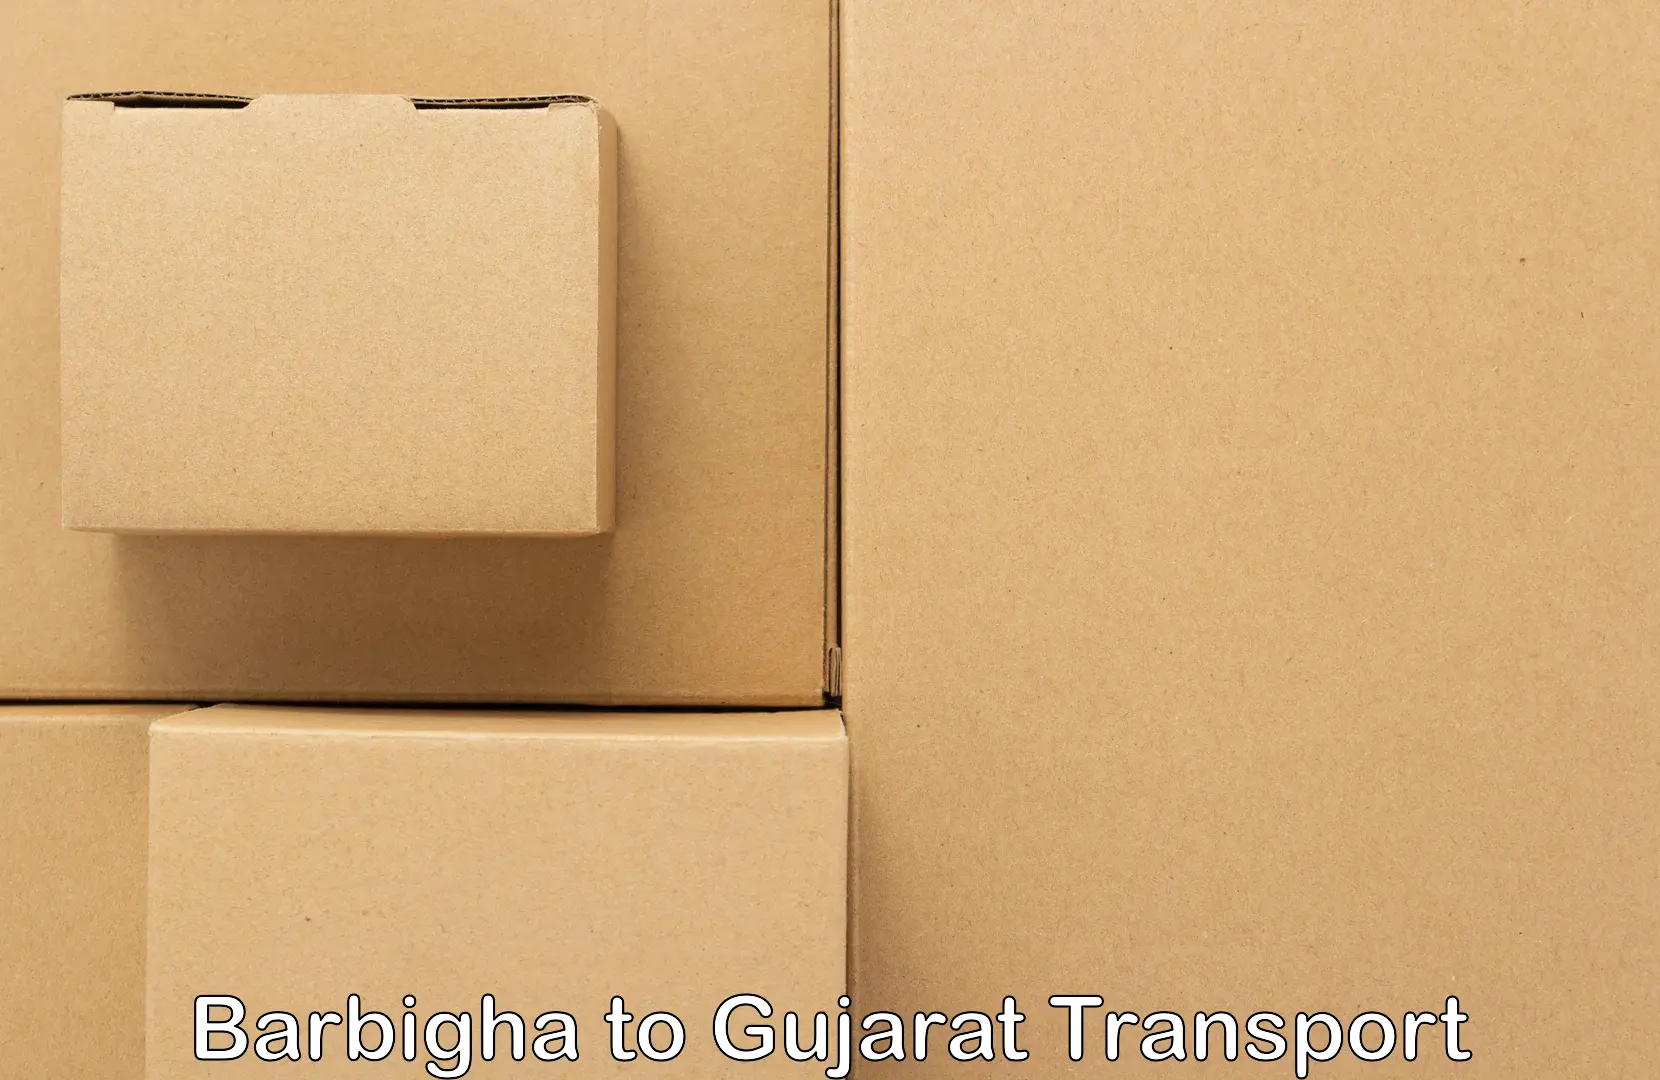 Part load transport service in India Barbigha to Dahej